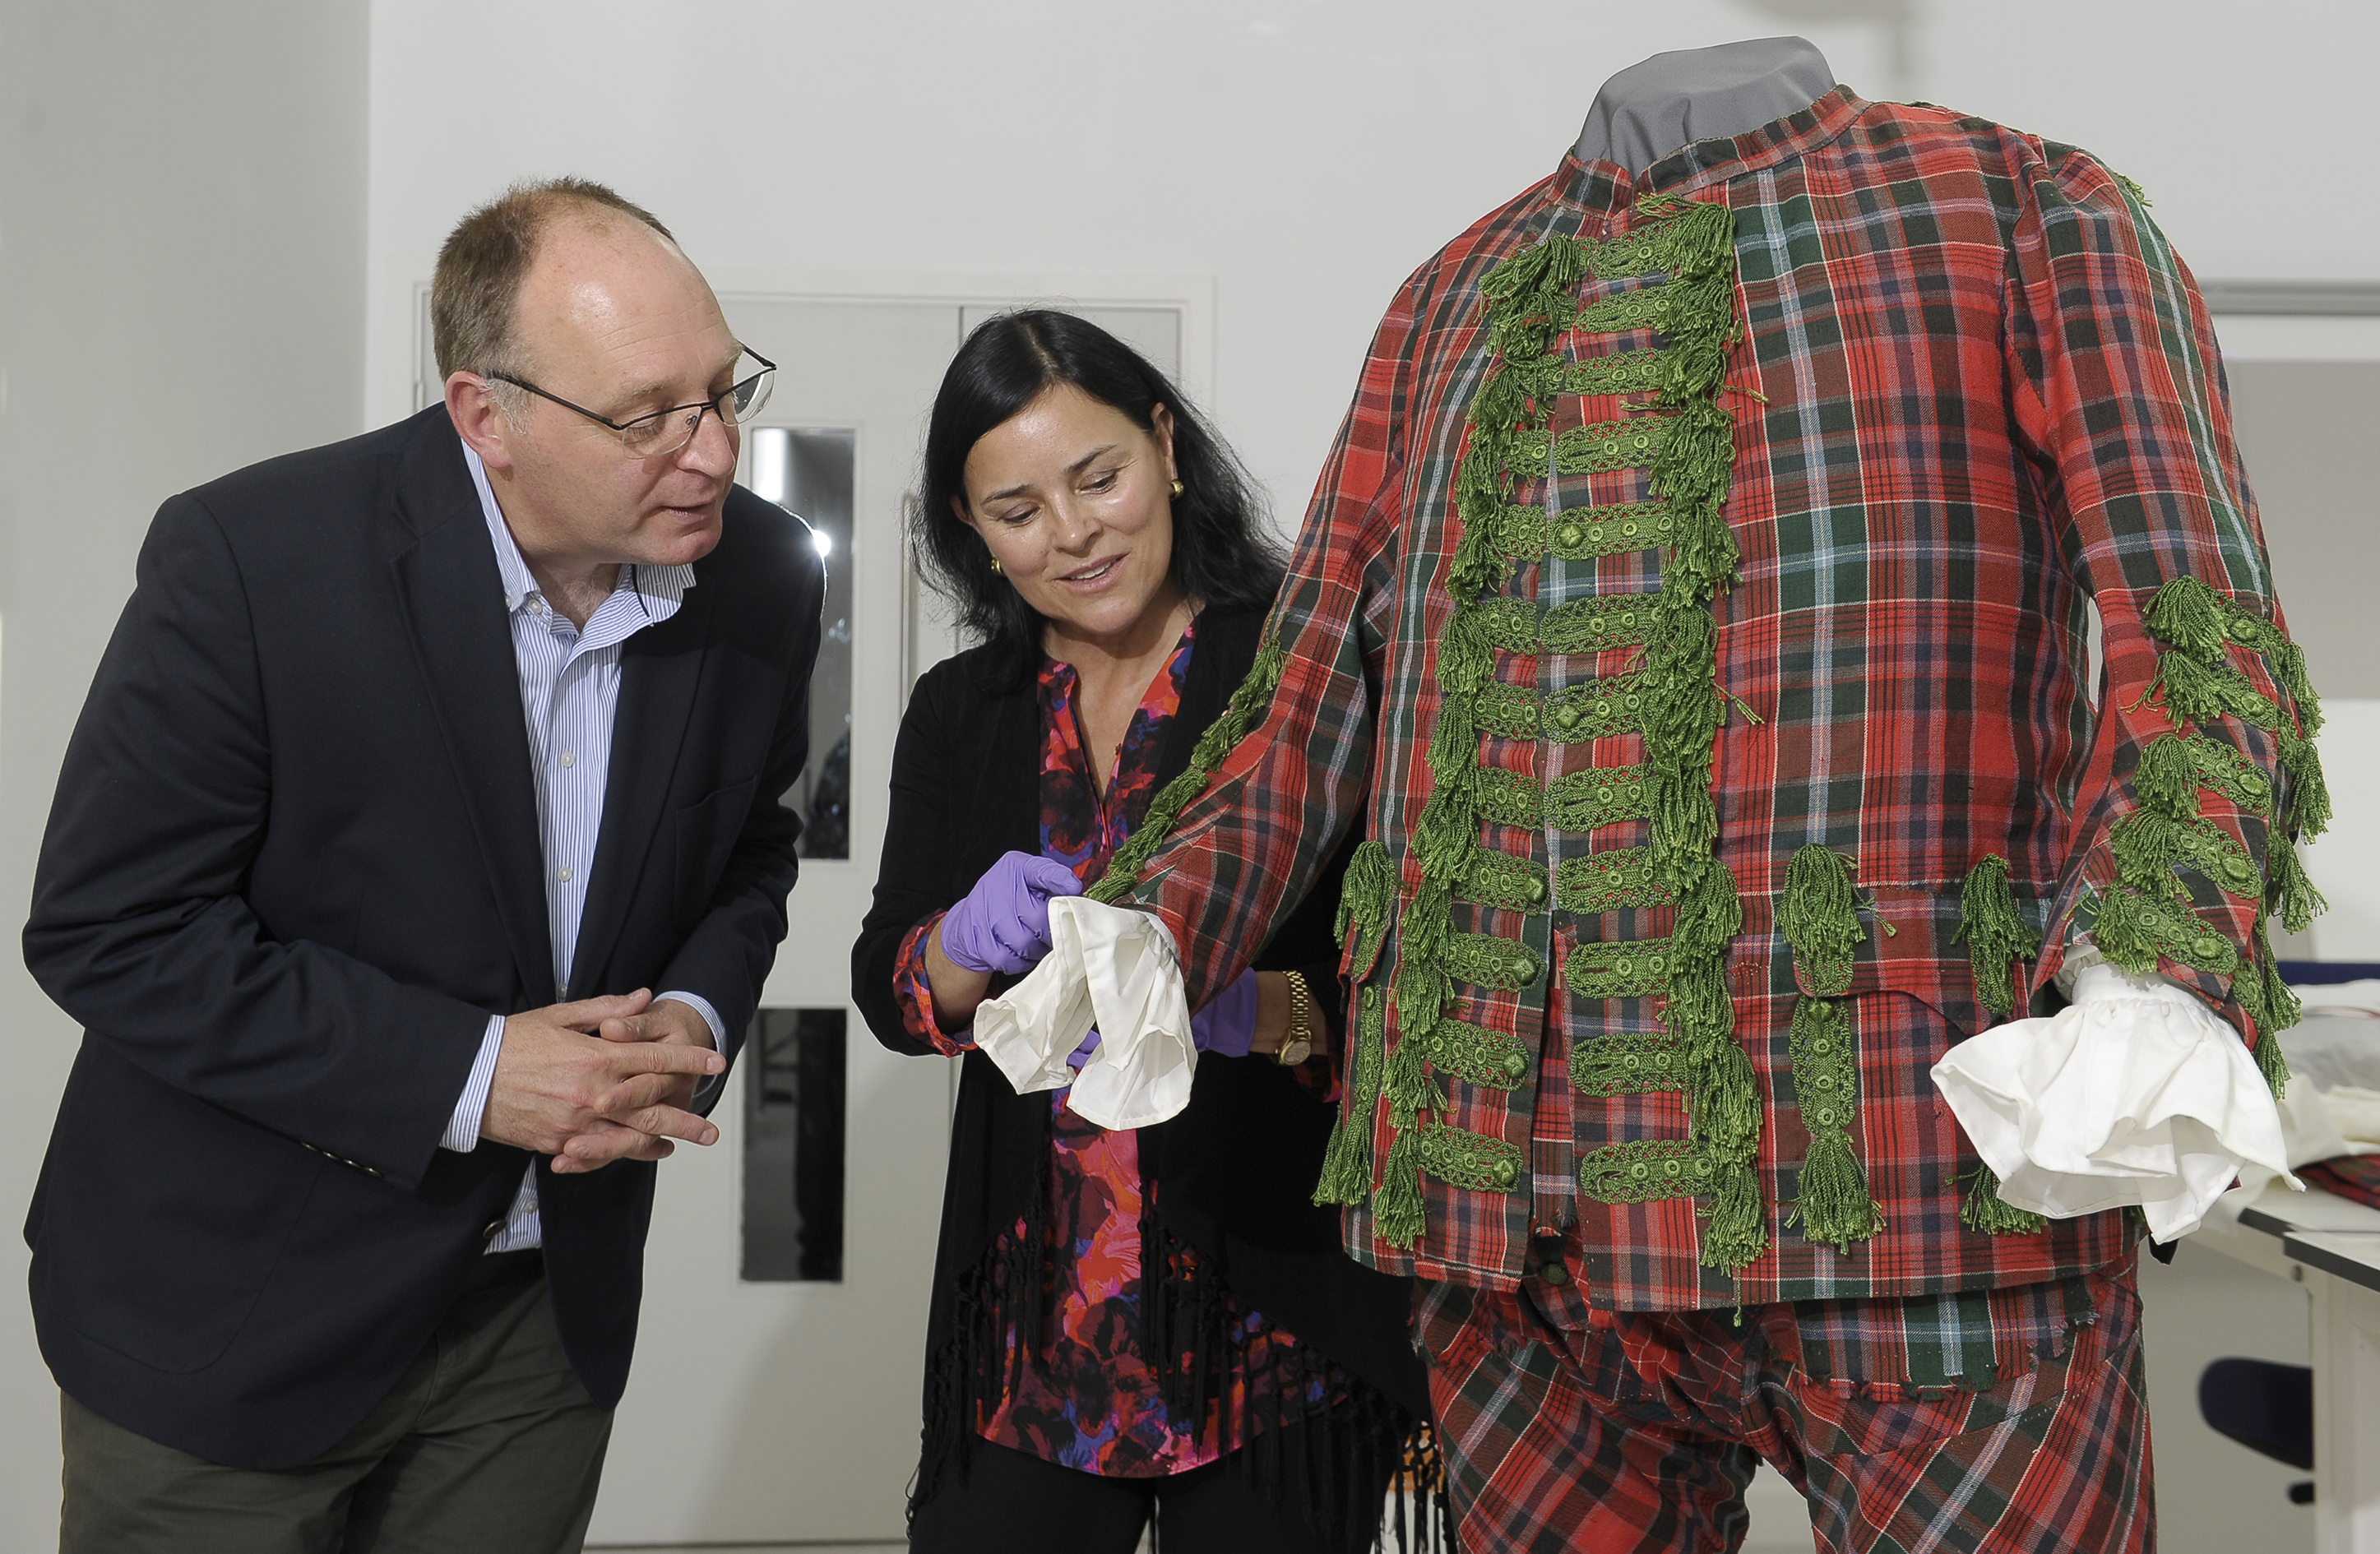 Diana Gabaldon and Principal Curator David Forsyth investigate a tartan suit bound for the Bonnie Prince Charlie and the Jacobites exhibition.